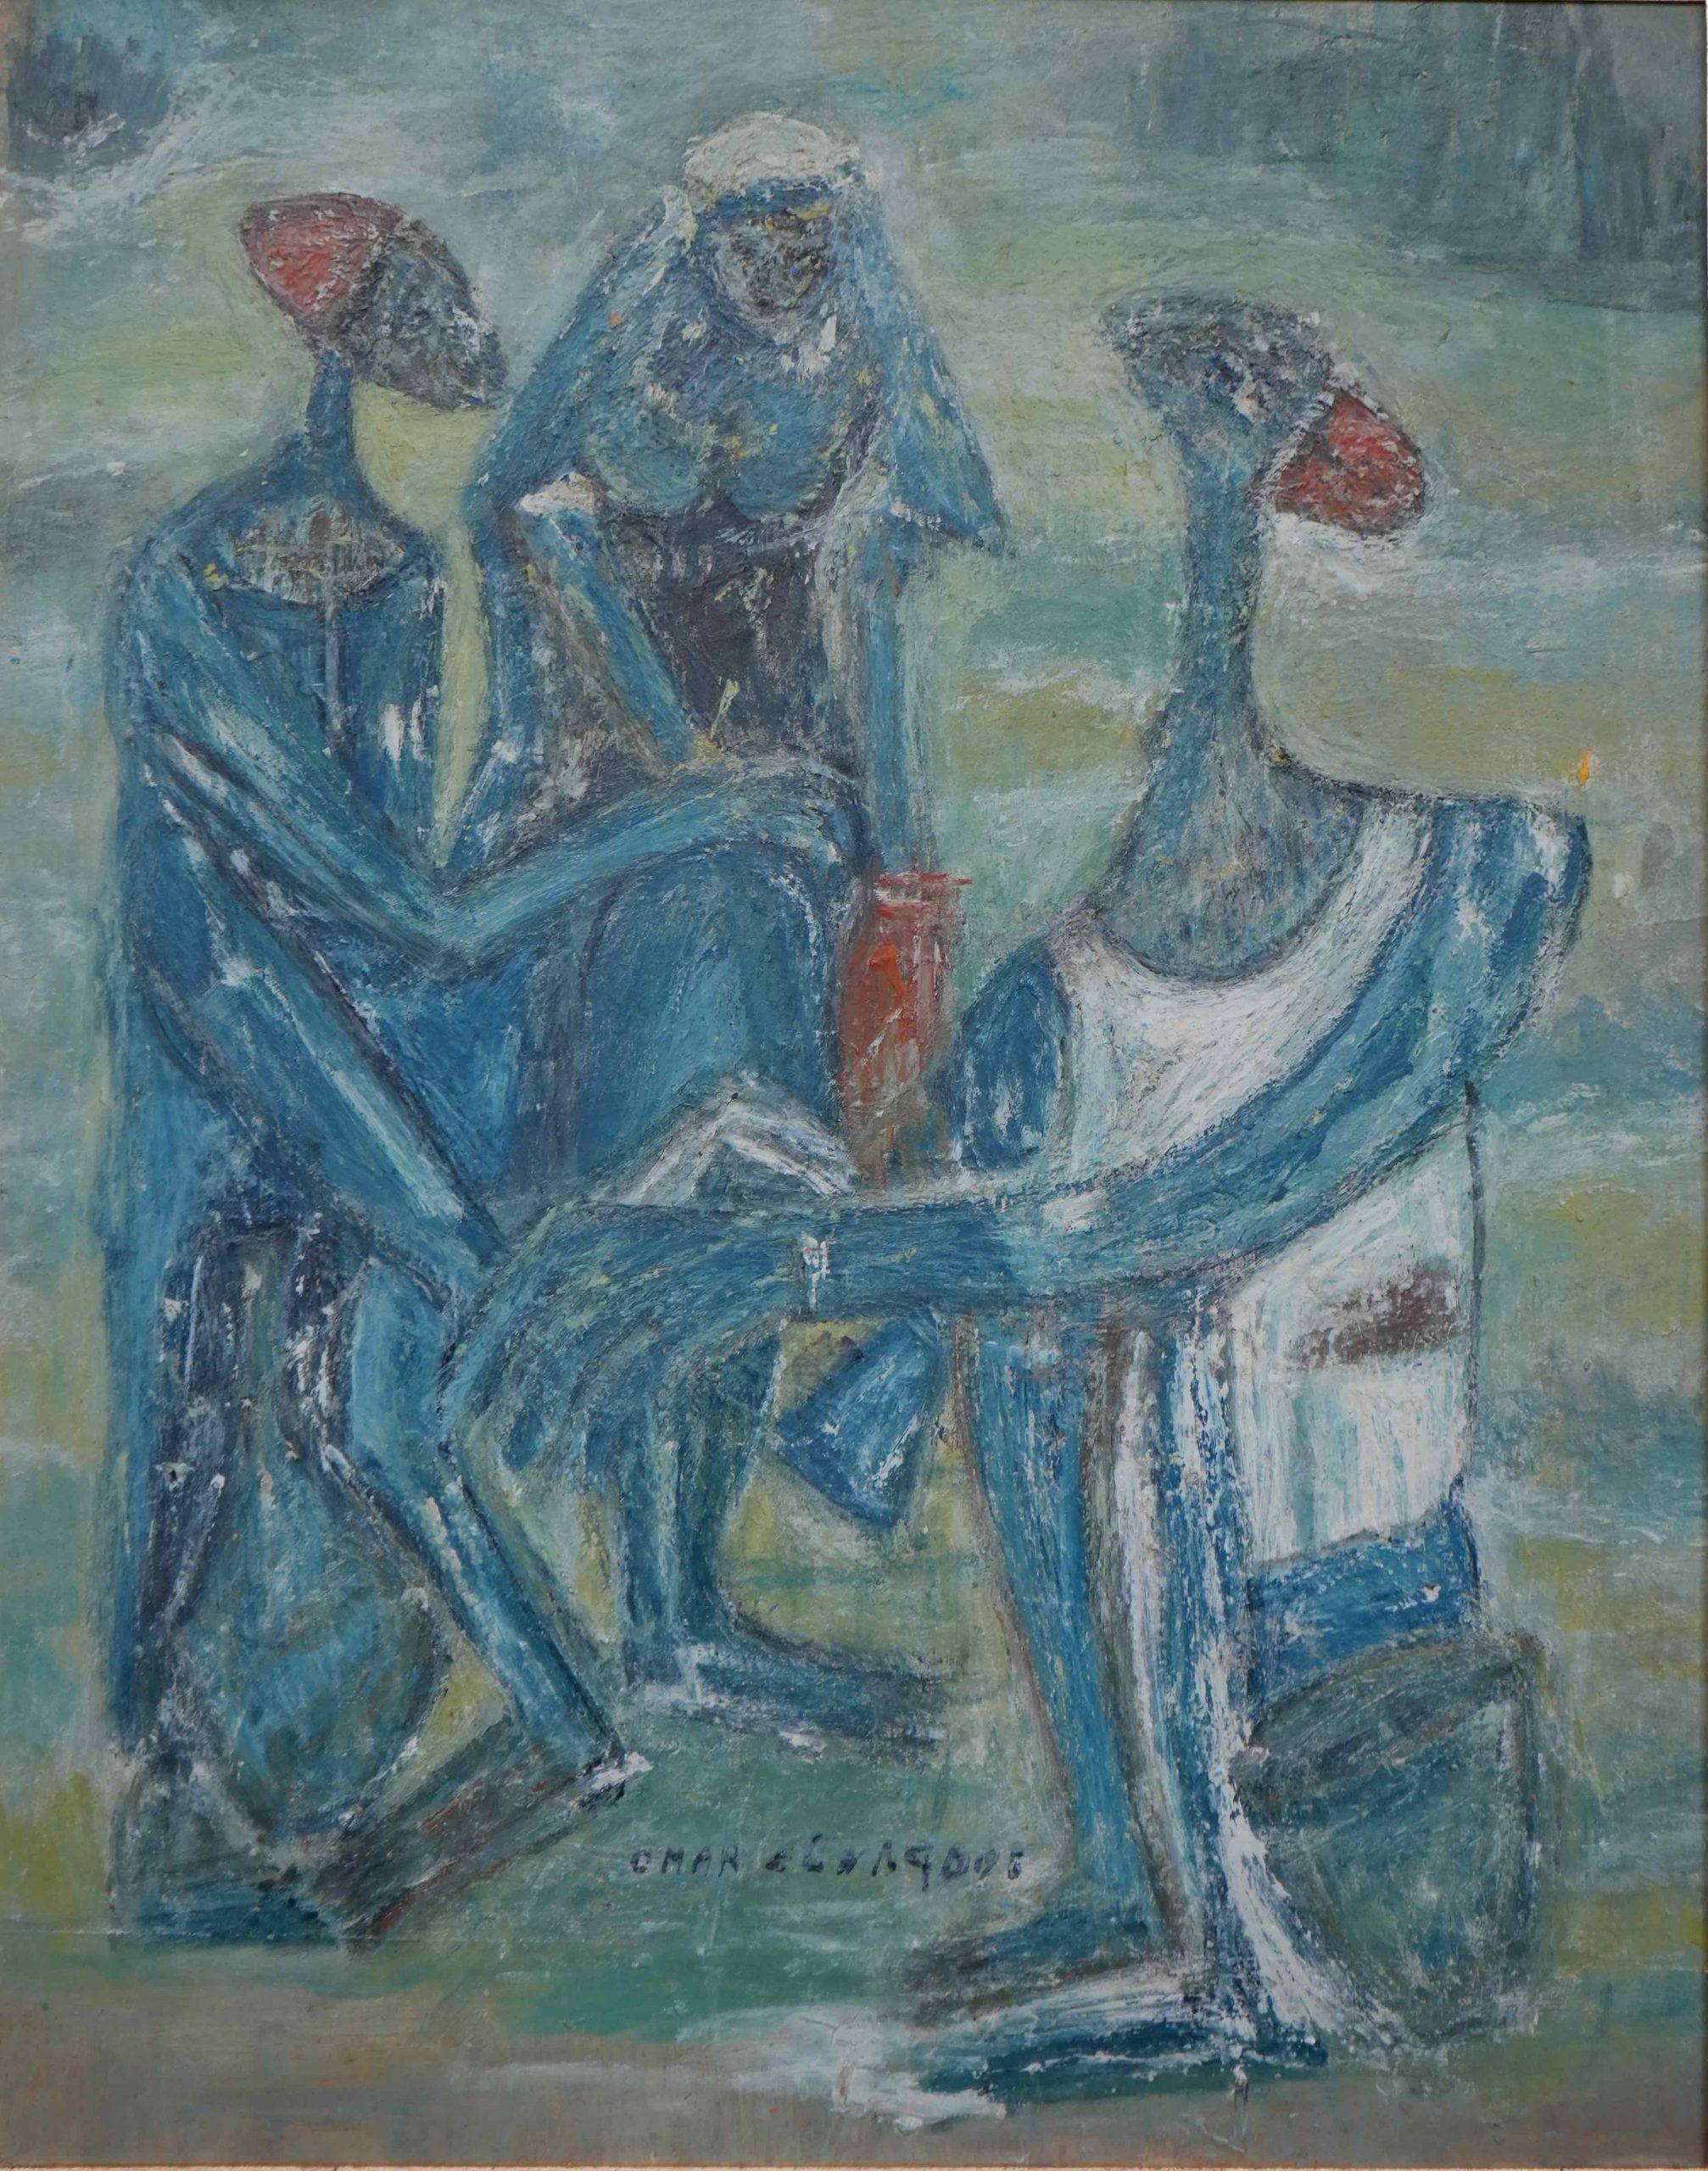 Omar El Nagdi Oil on wood  65 x 50 cm Signed and dated 1995